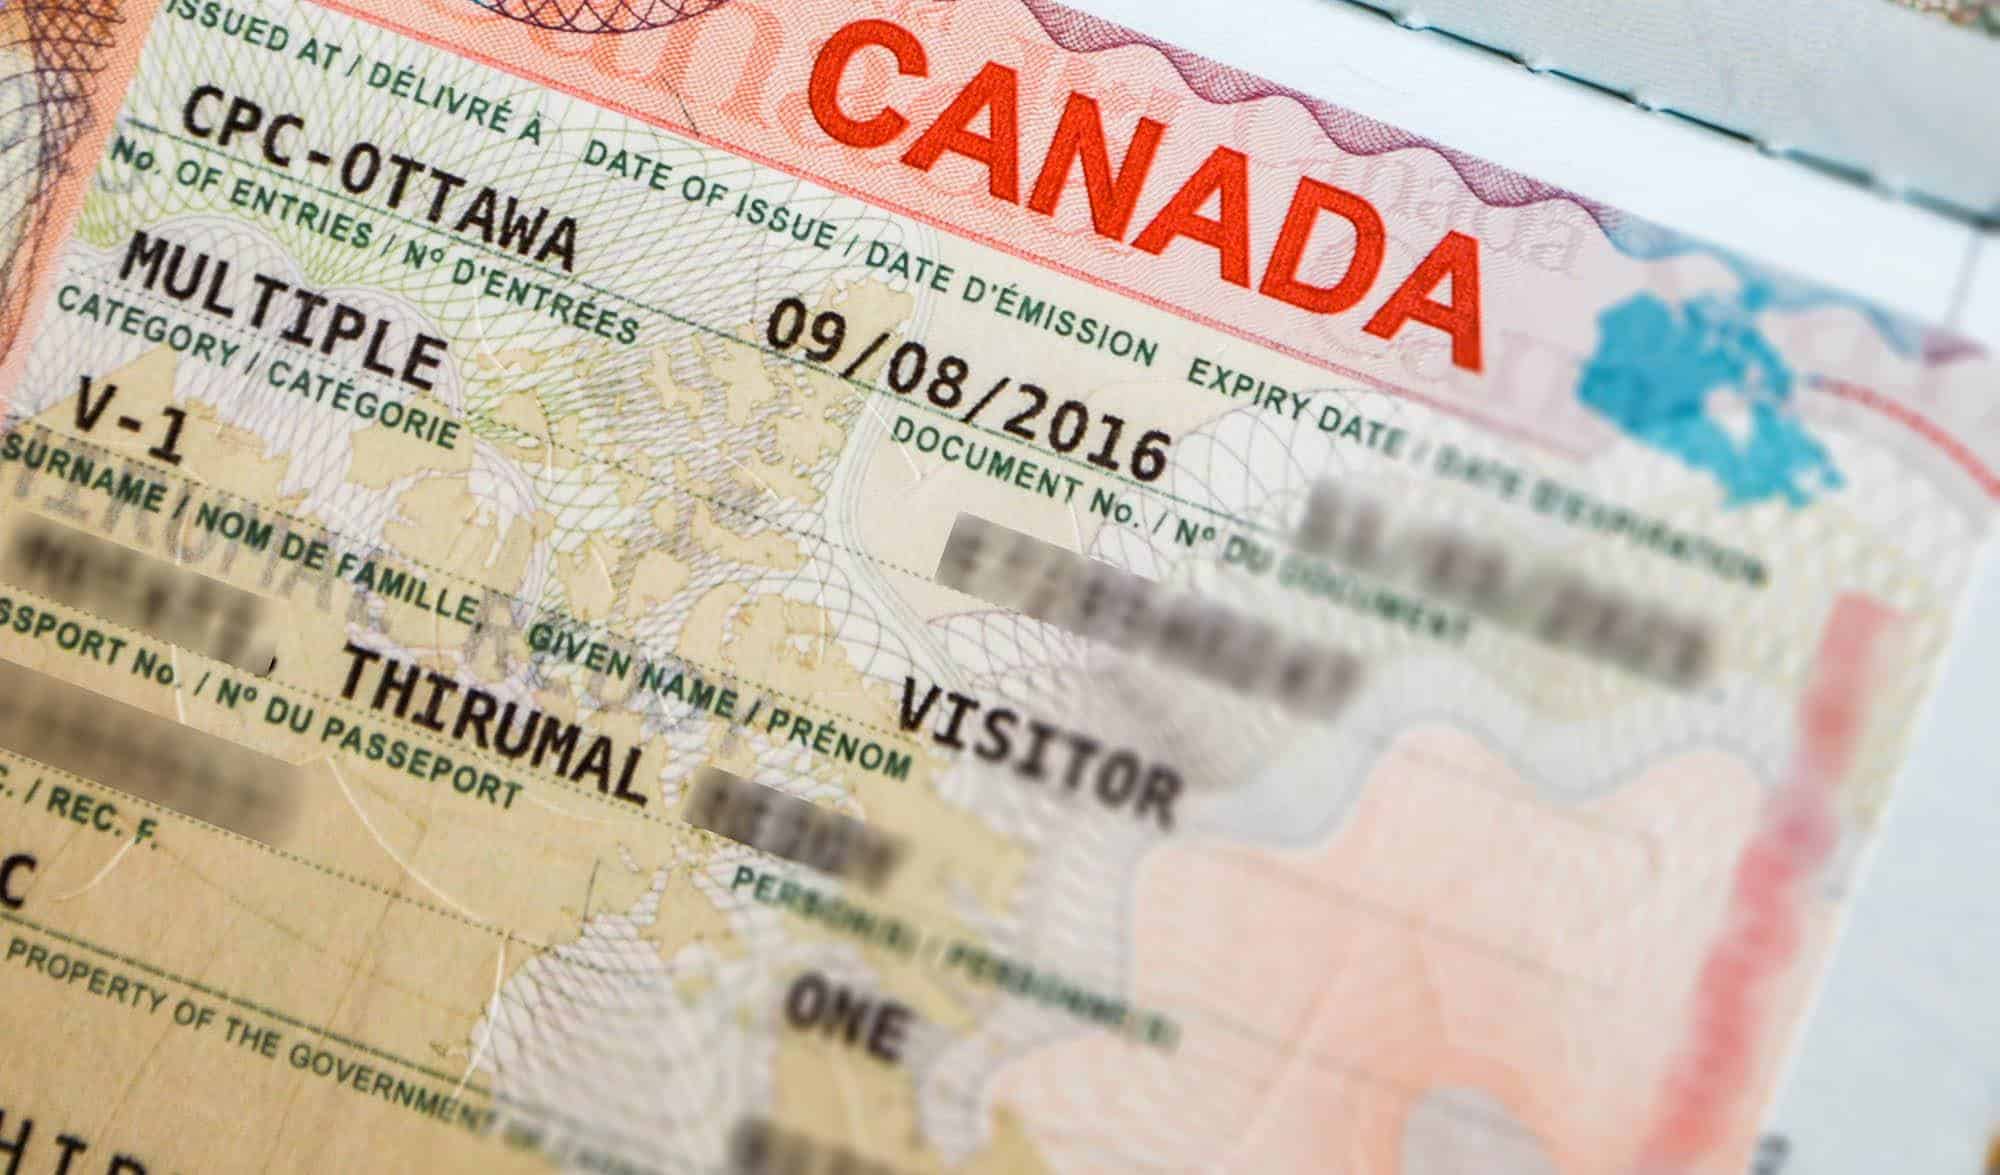 Canada Tourist Visa From India Documents Checklist Canada Tourist Visa Requirements Visa Traveler